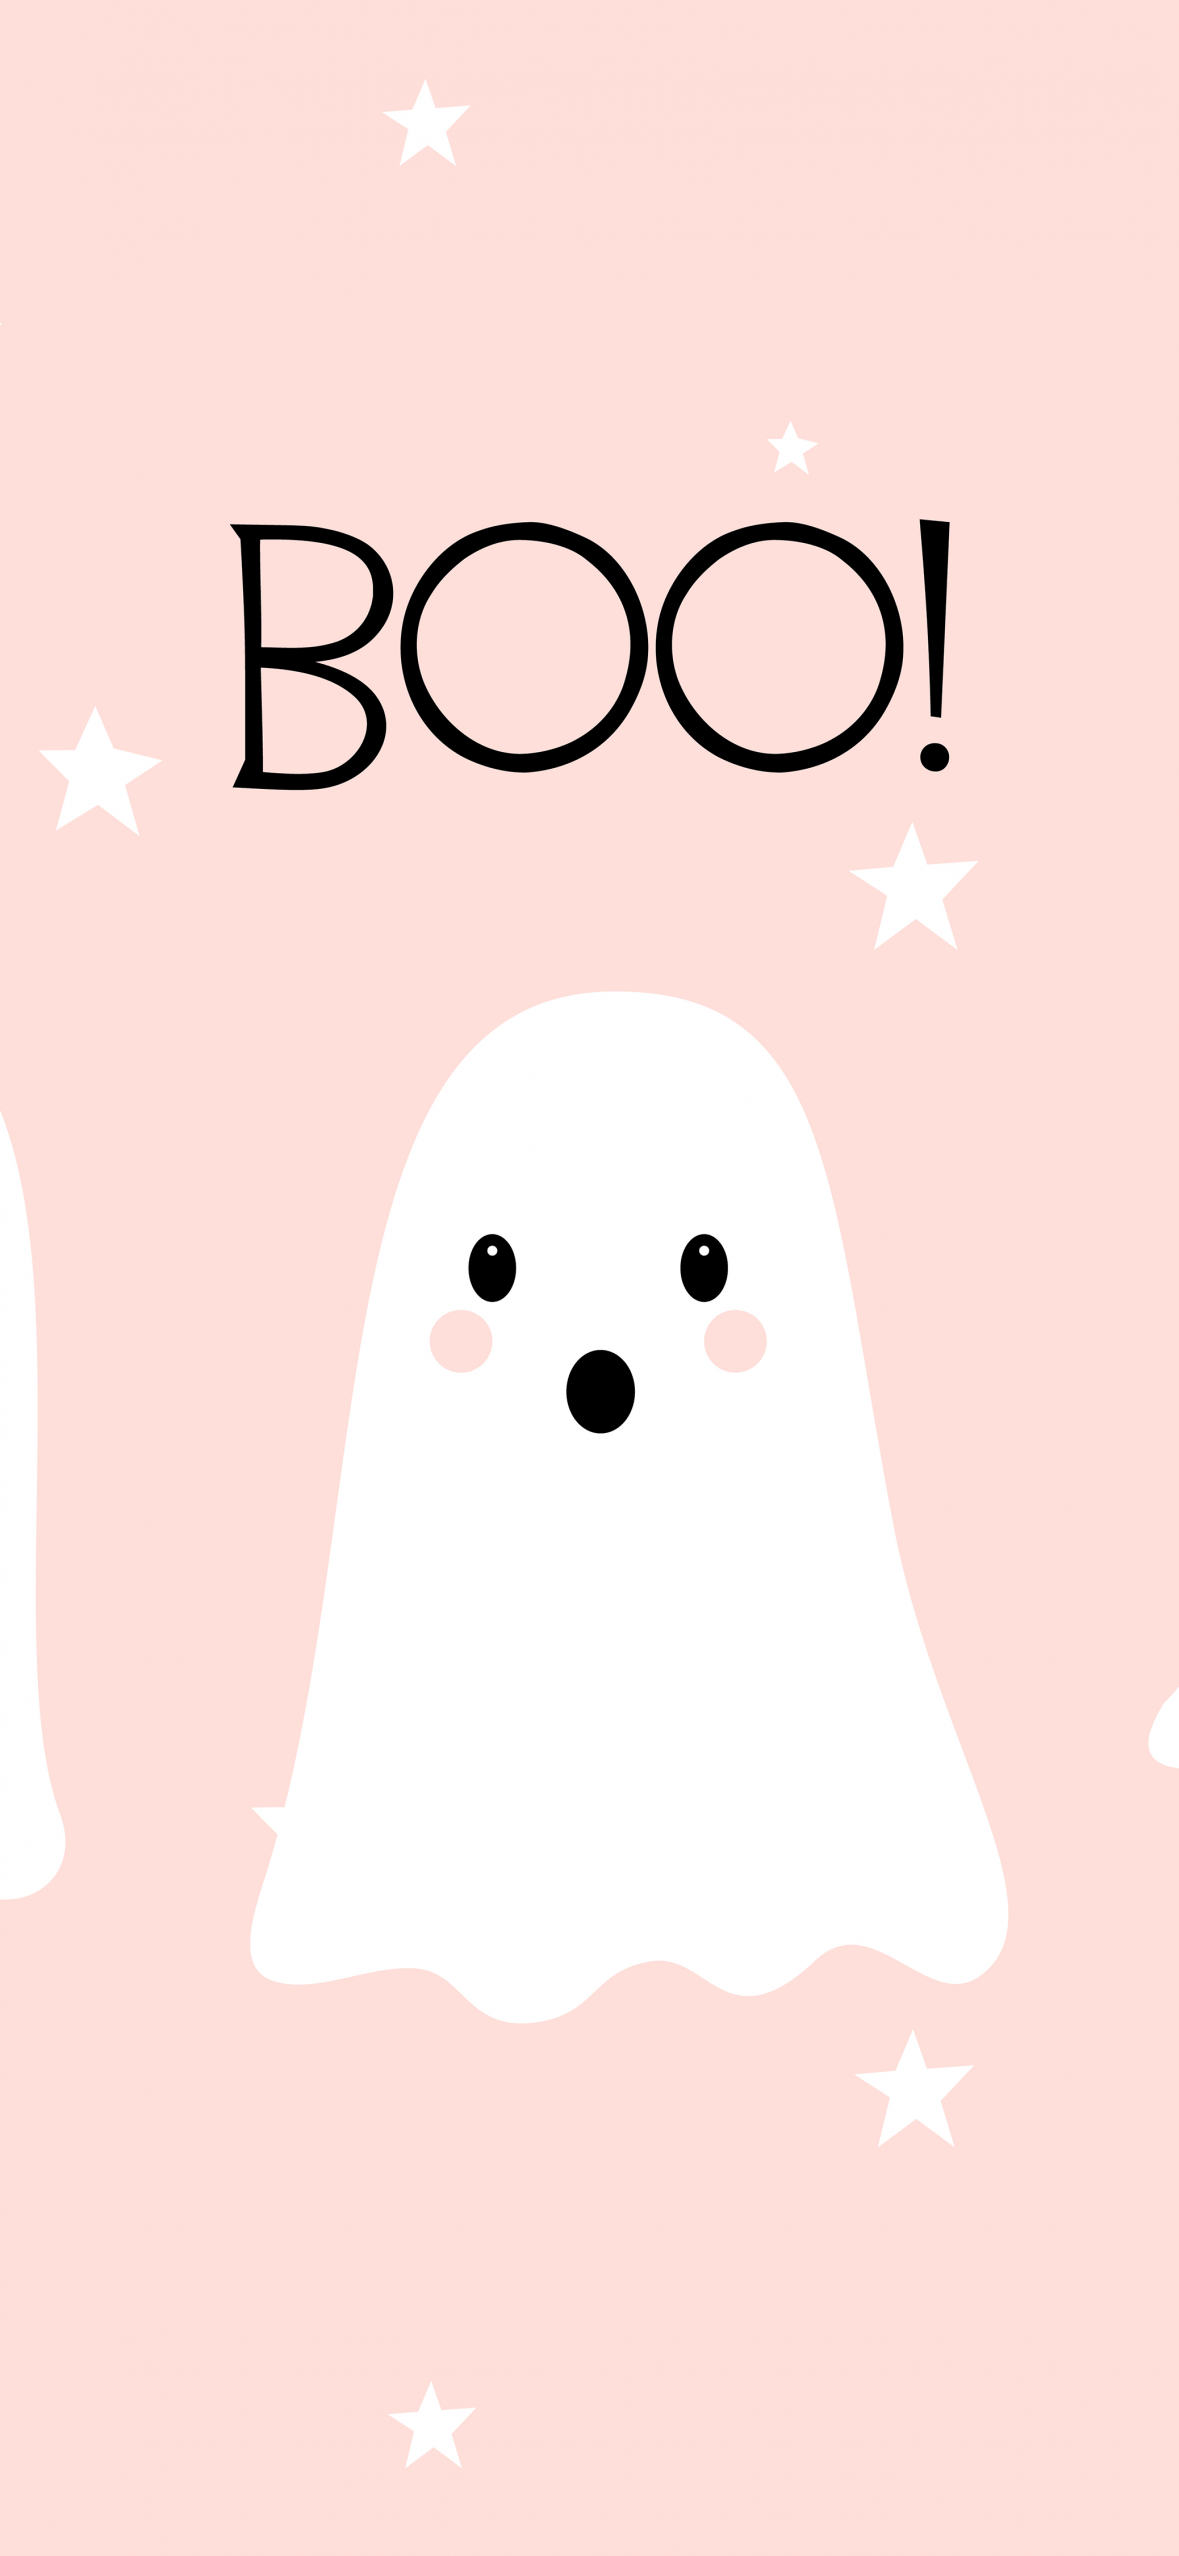 A cute ghost with the word 